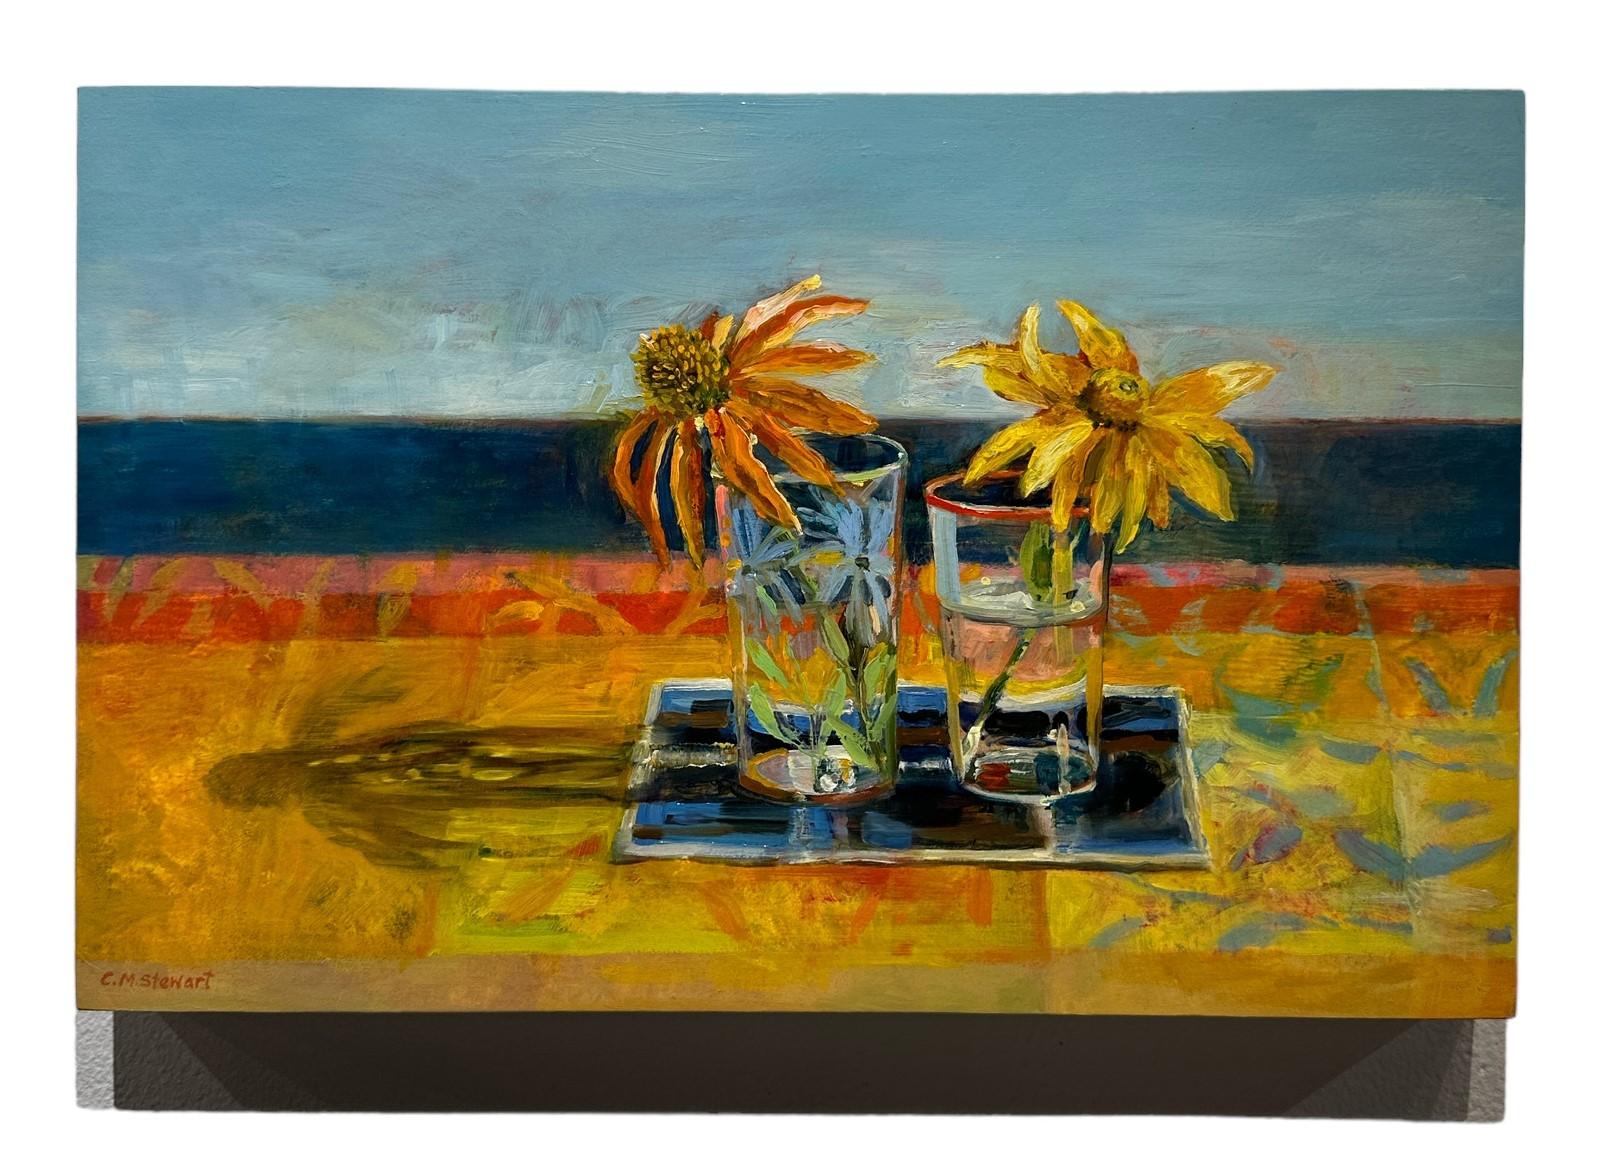 Carol Stewart
Coneflower, Rudbeckia
oil on paper on panel
11h x 18w in
27.94h x 45.72w cm
CST008

Through her ethereal and often dreamlike paintings Carol Stewart invites the viewer into her world, immersing the audience within her ever changing